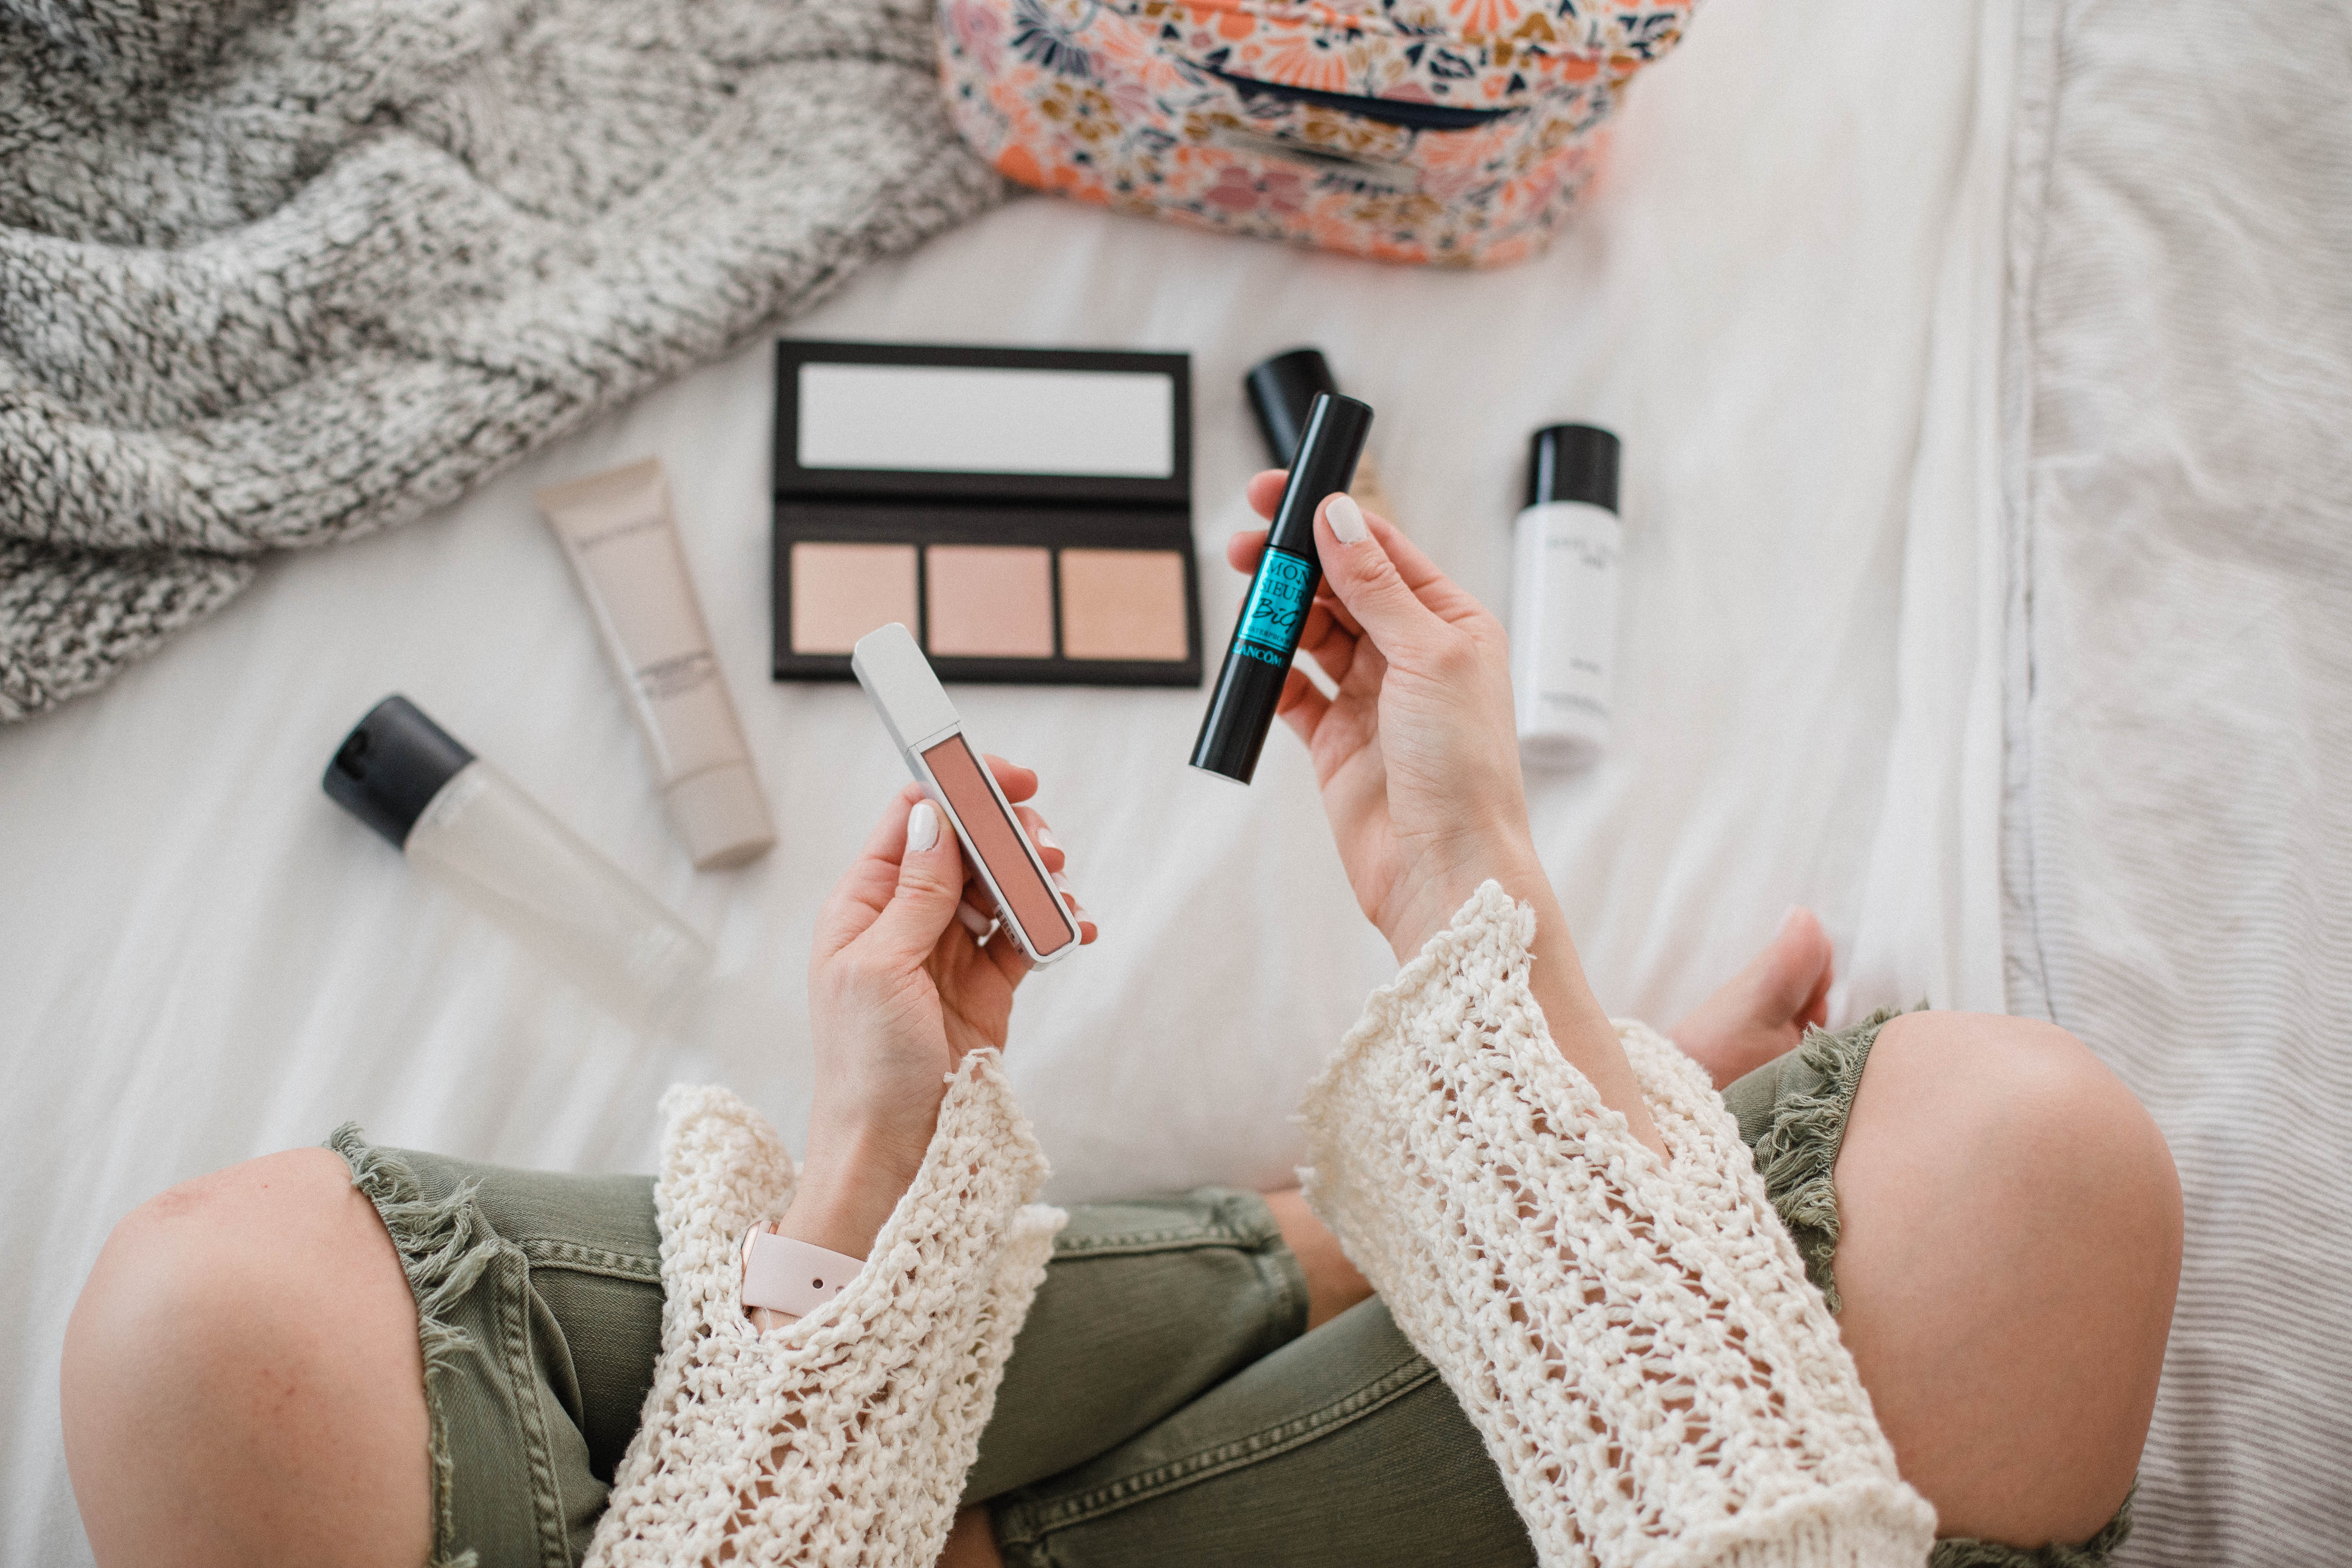 Connecticut life and style blogger Lauren McBride shares her Sephora Beauty Appreciation Event sale picks and information about the Beauty Insider program.